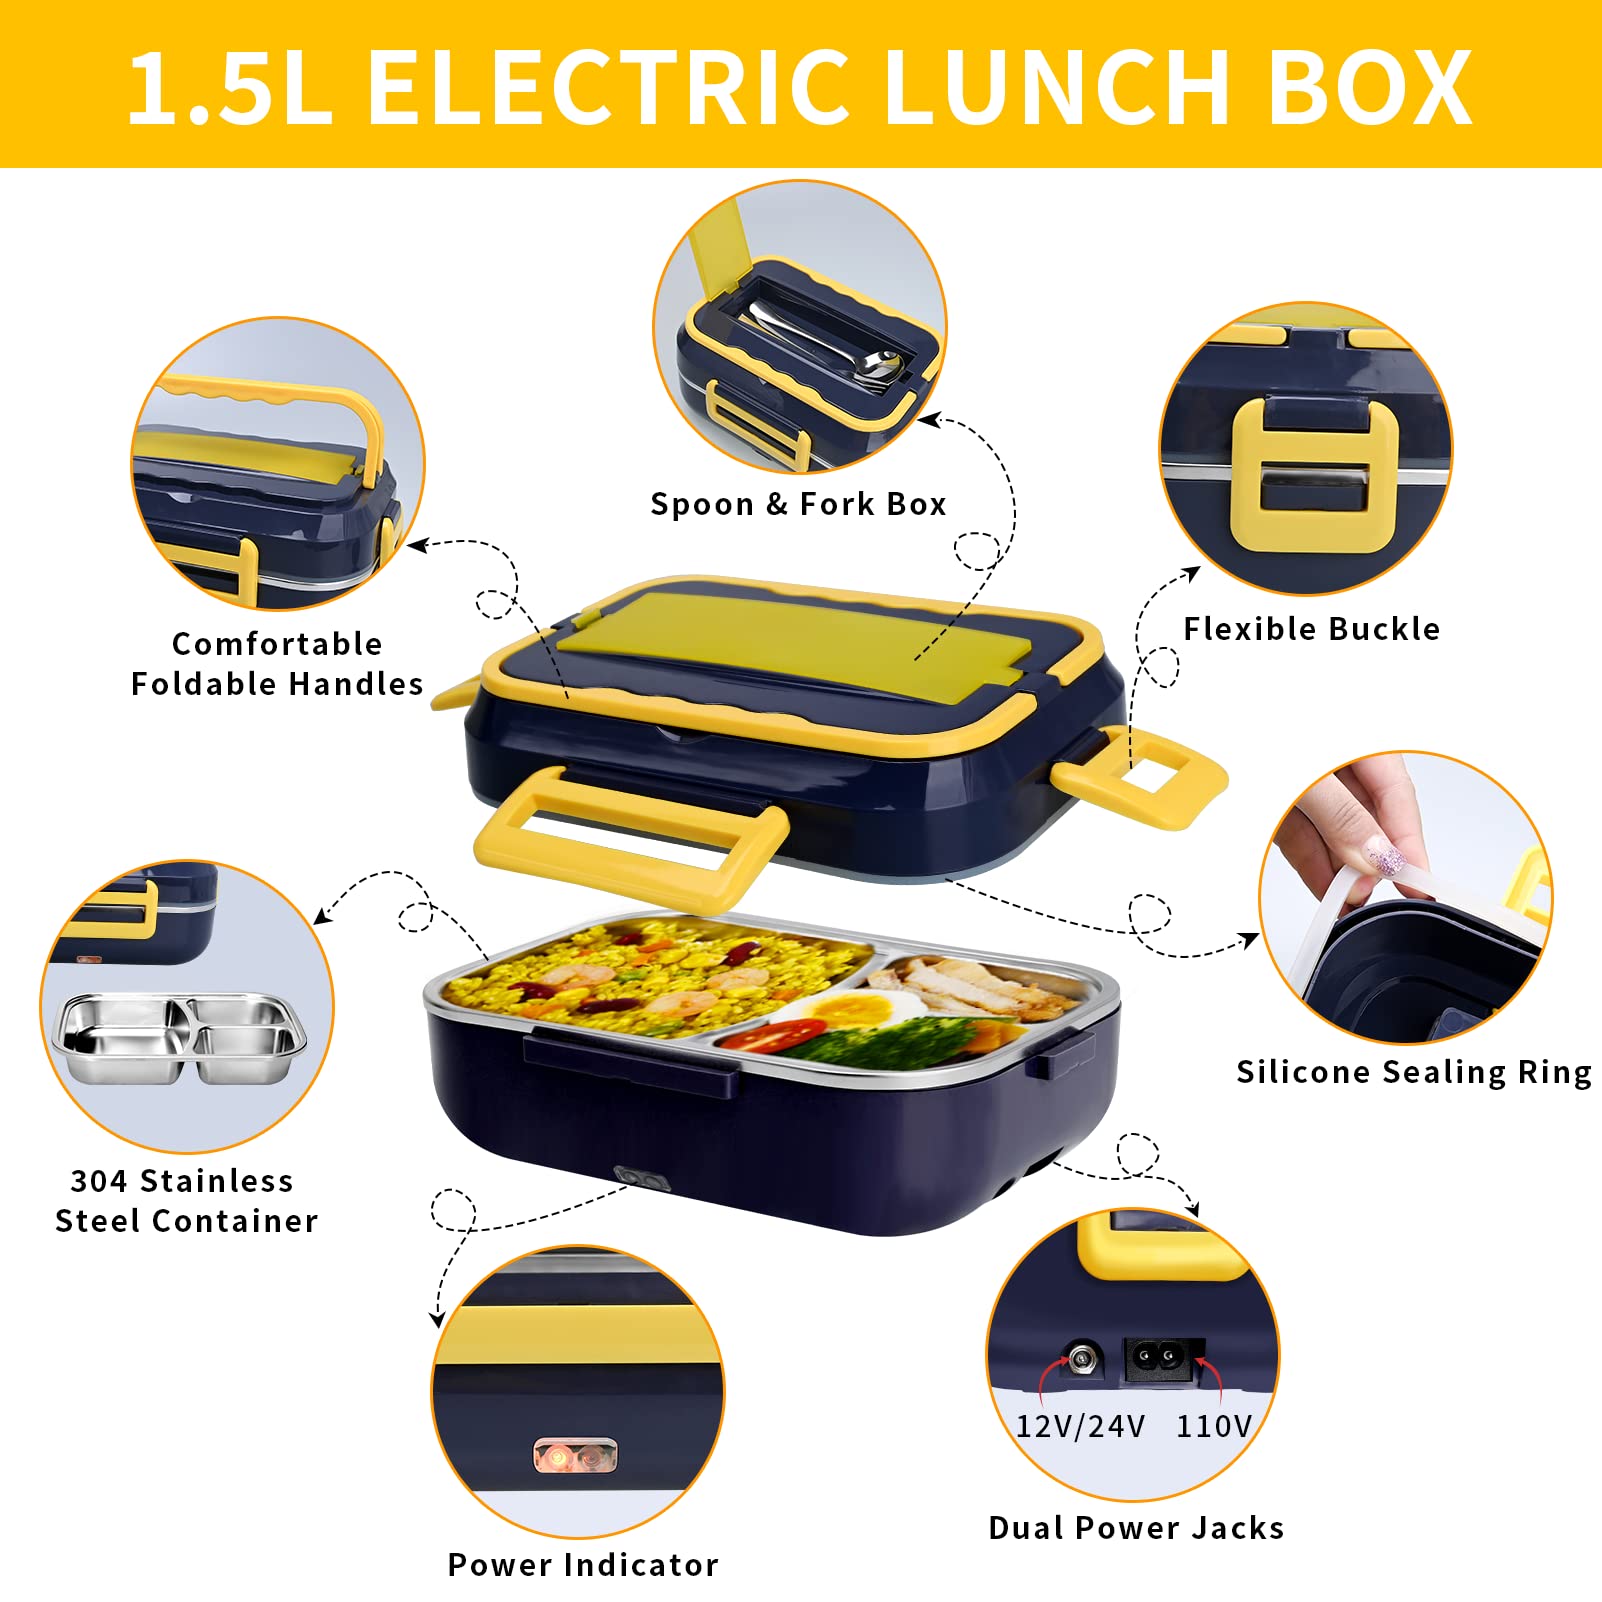 1.5L Portable Food Warmer Electric Lunch Box 304 Stainless Steel Container